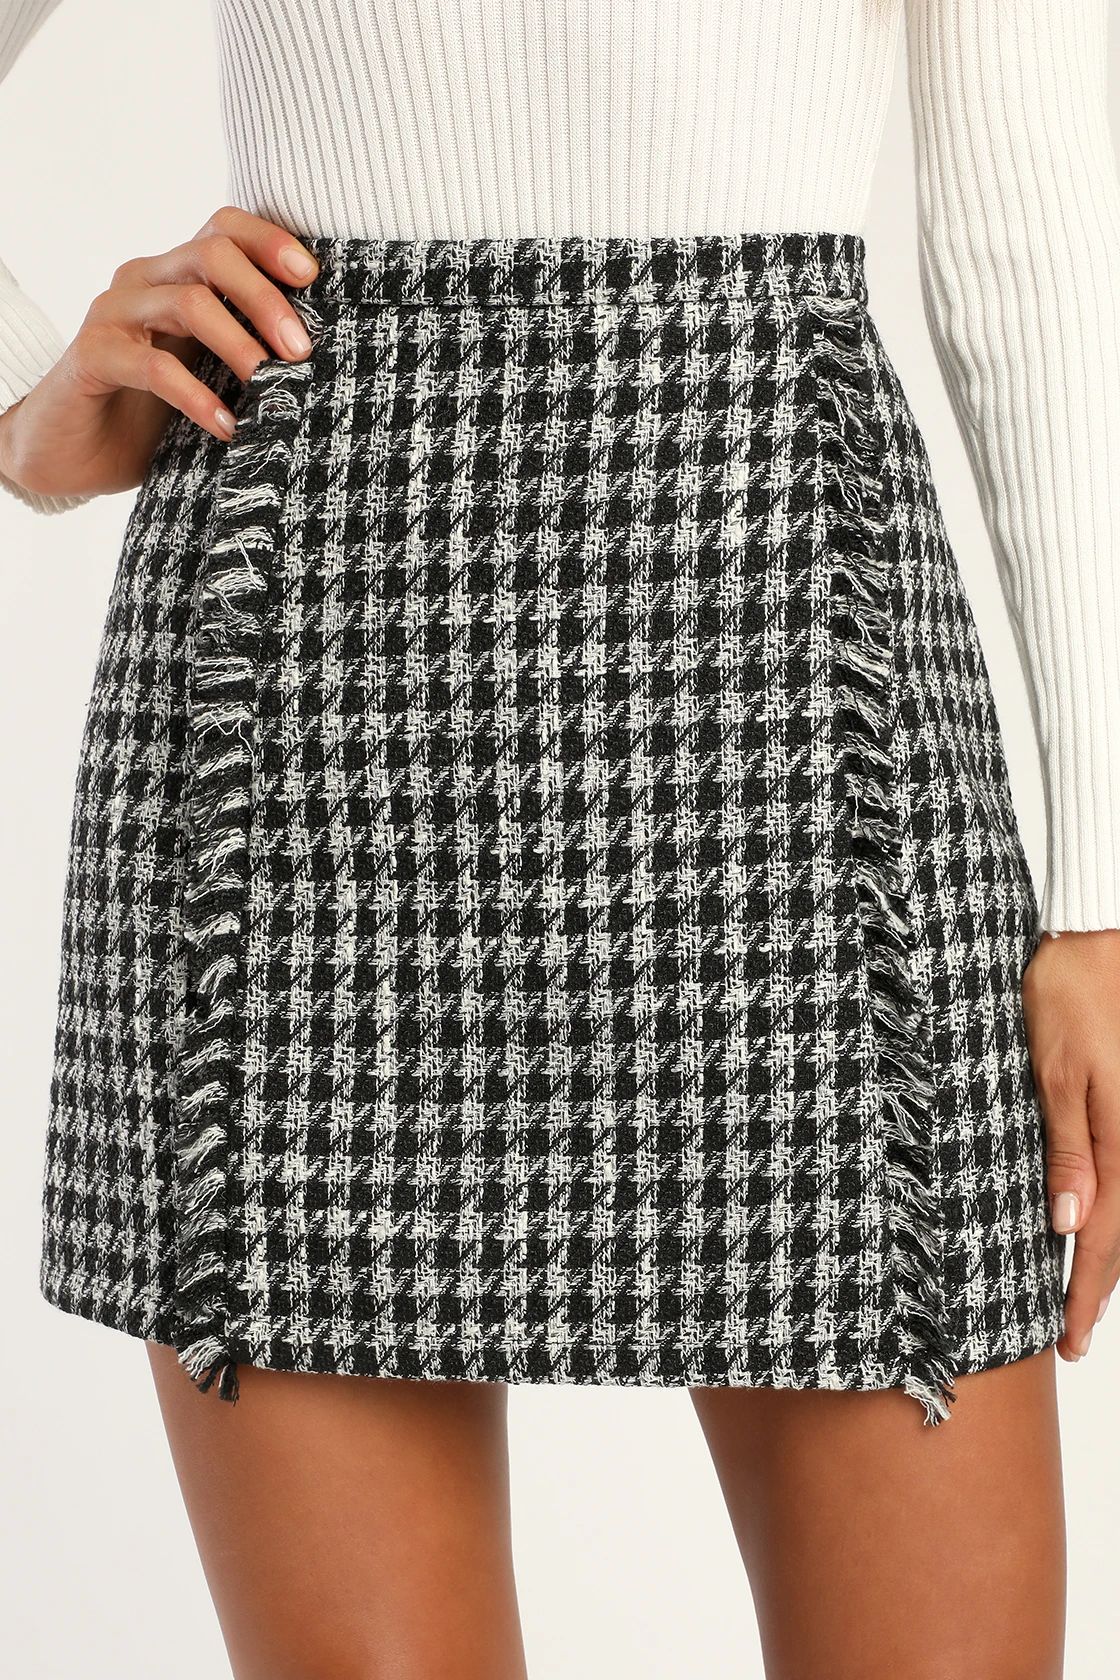 Get the Grade Black and White Houndstooth Tweed Mini Skirt | Lulus (US)